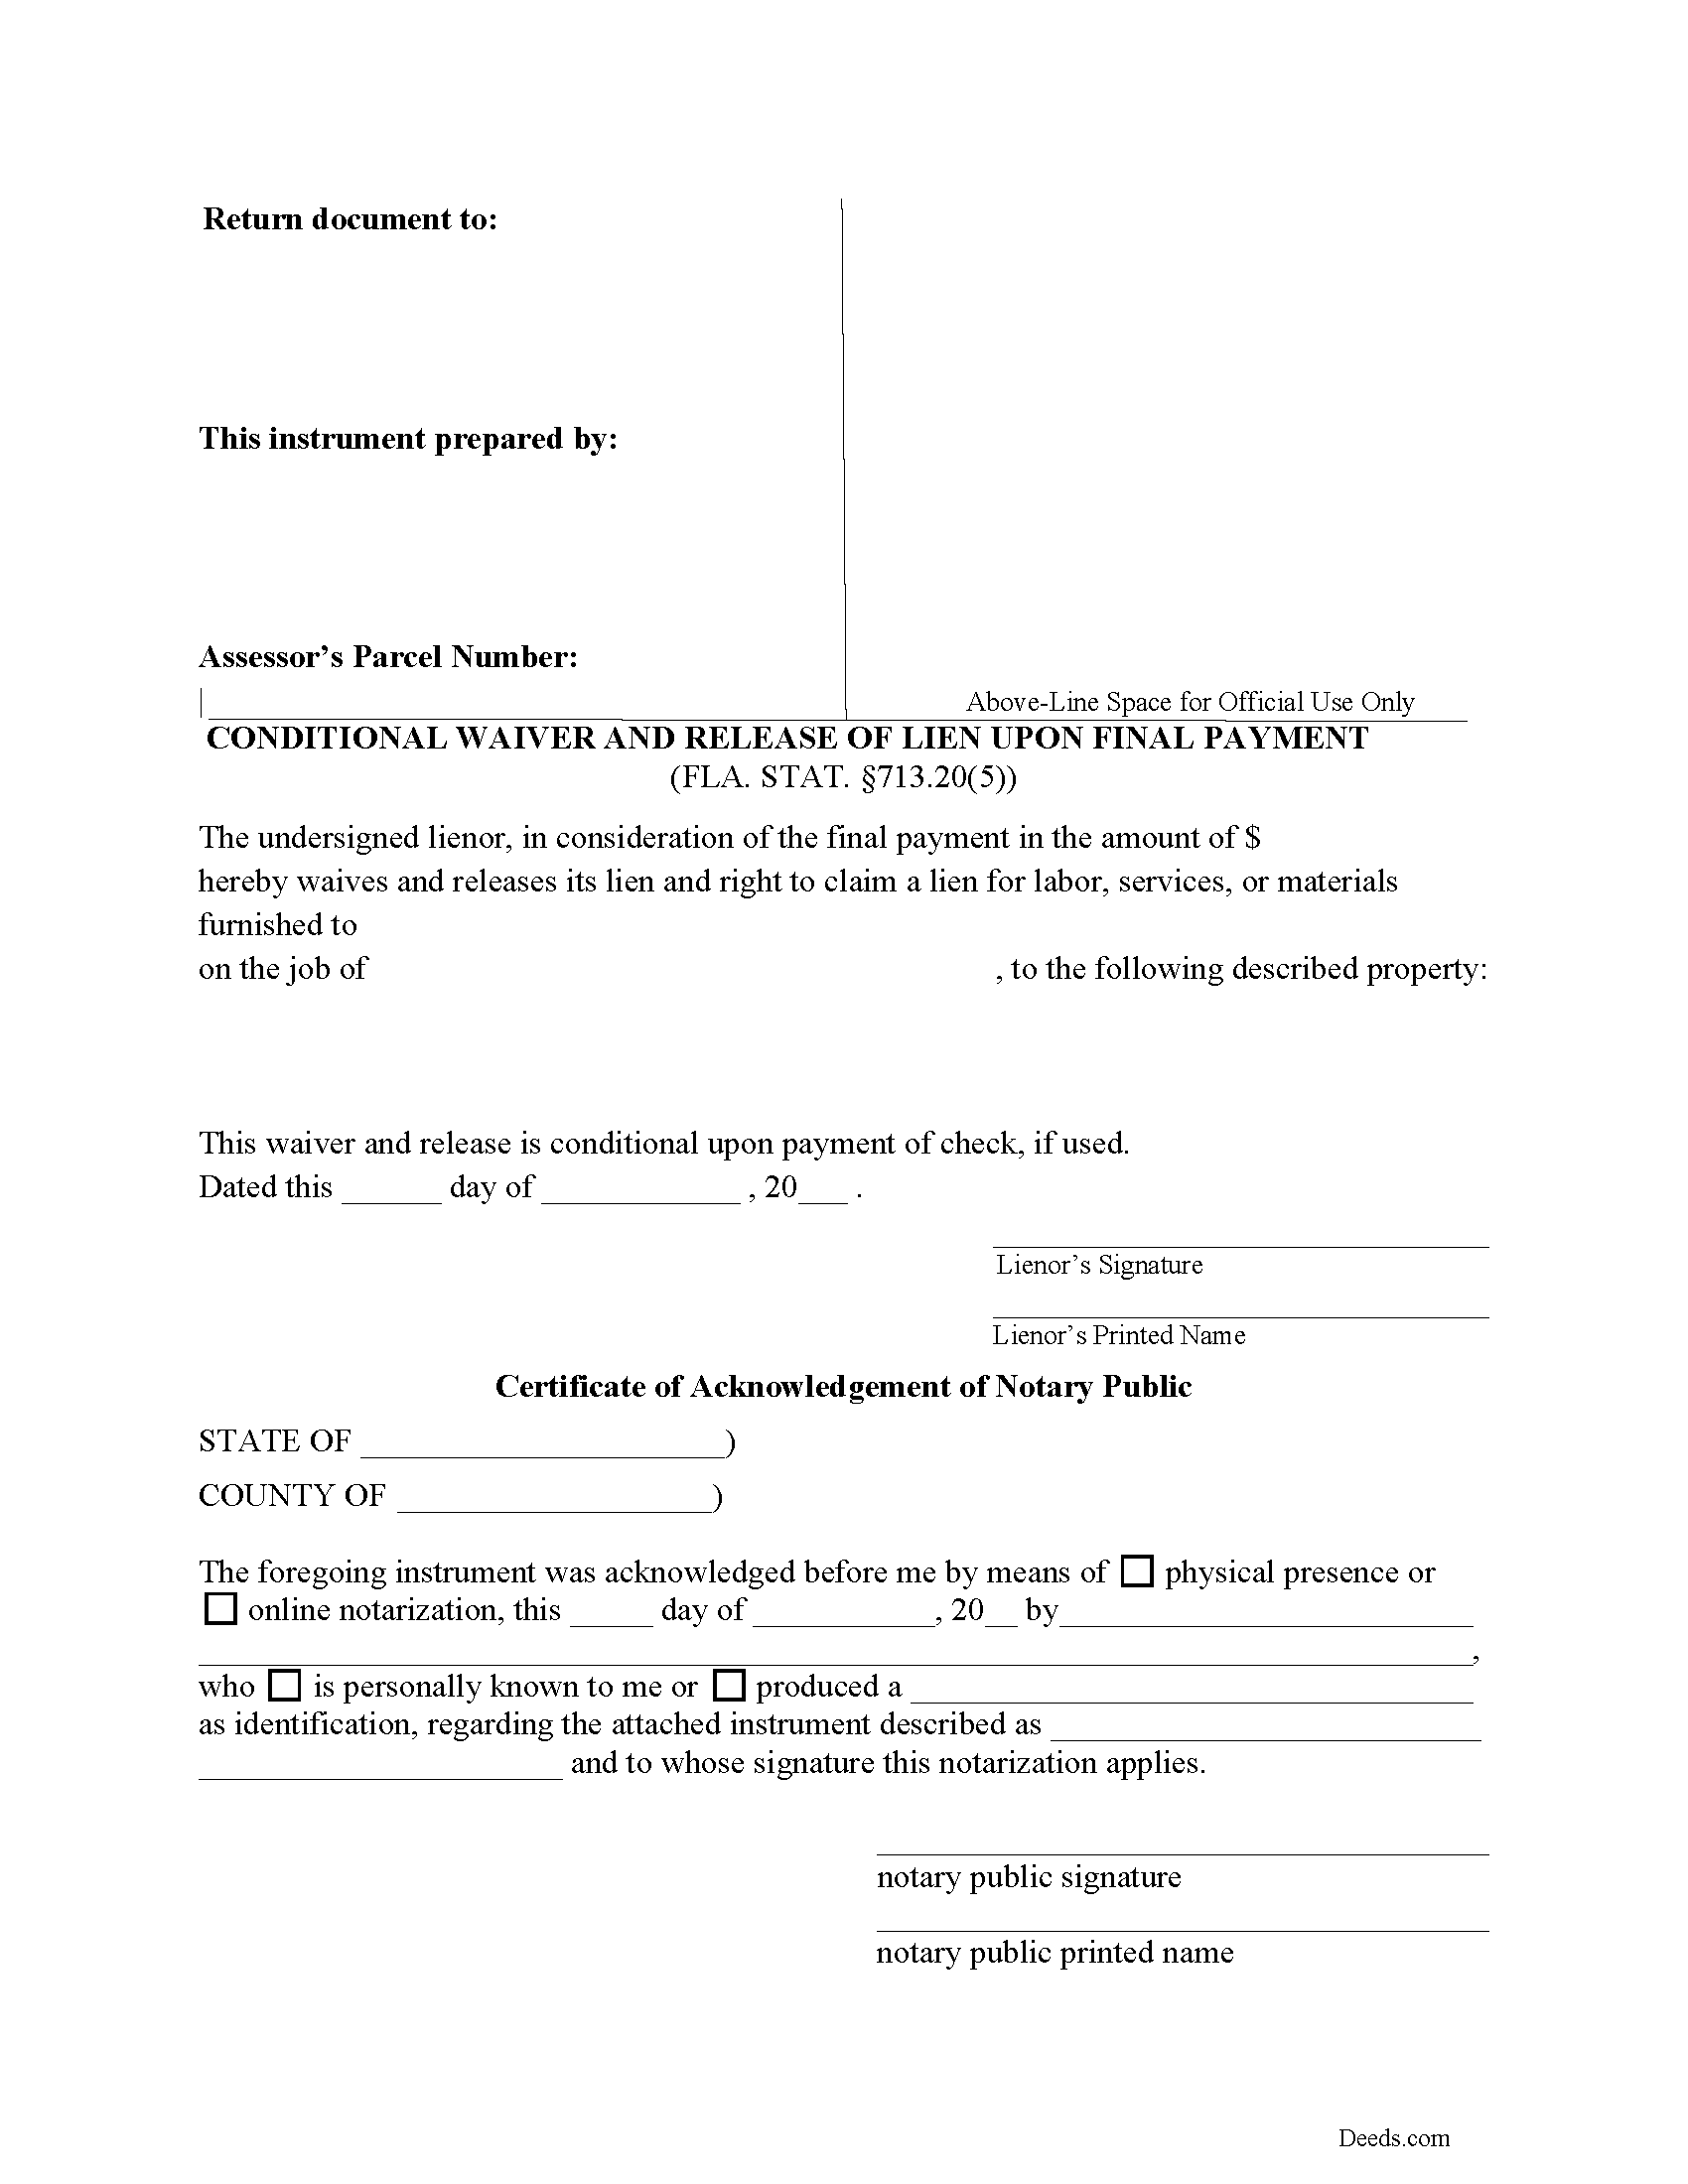 Conditional Waiver and Release of Lien upon Final Payment Form